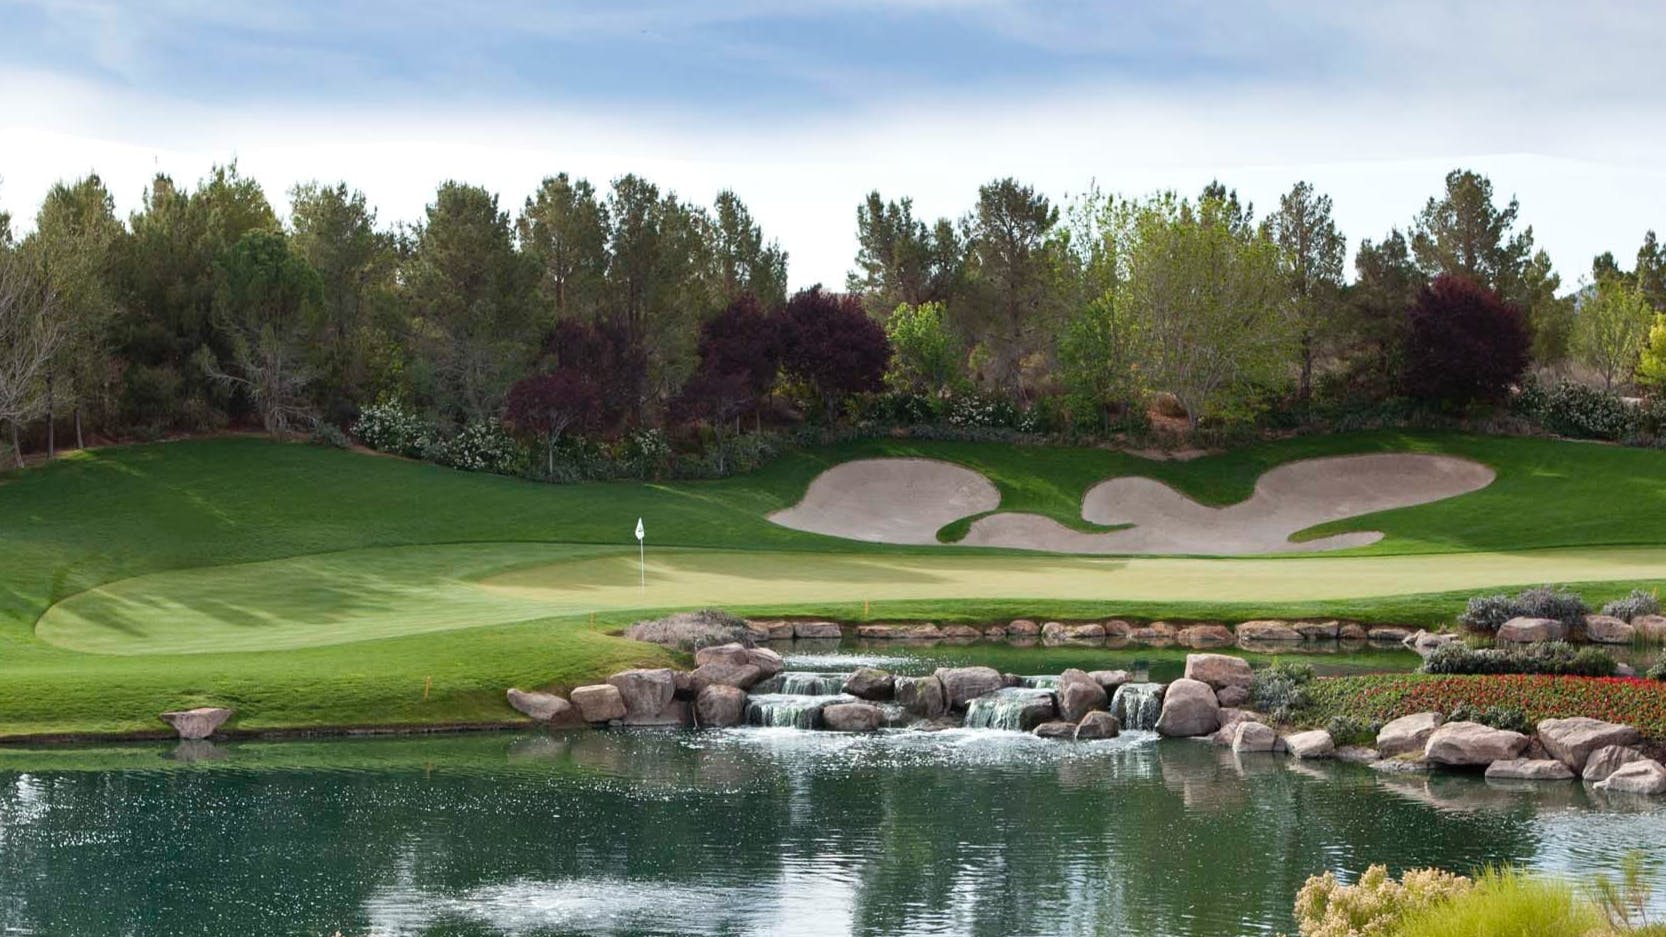 A landscape of a lush golf course with a pond and sand traps.